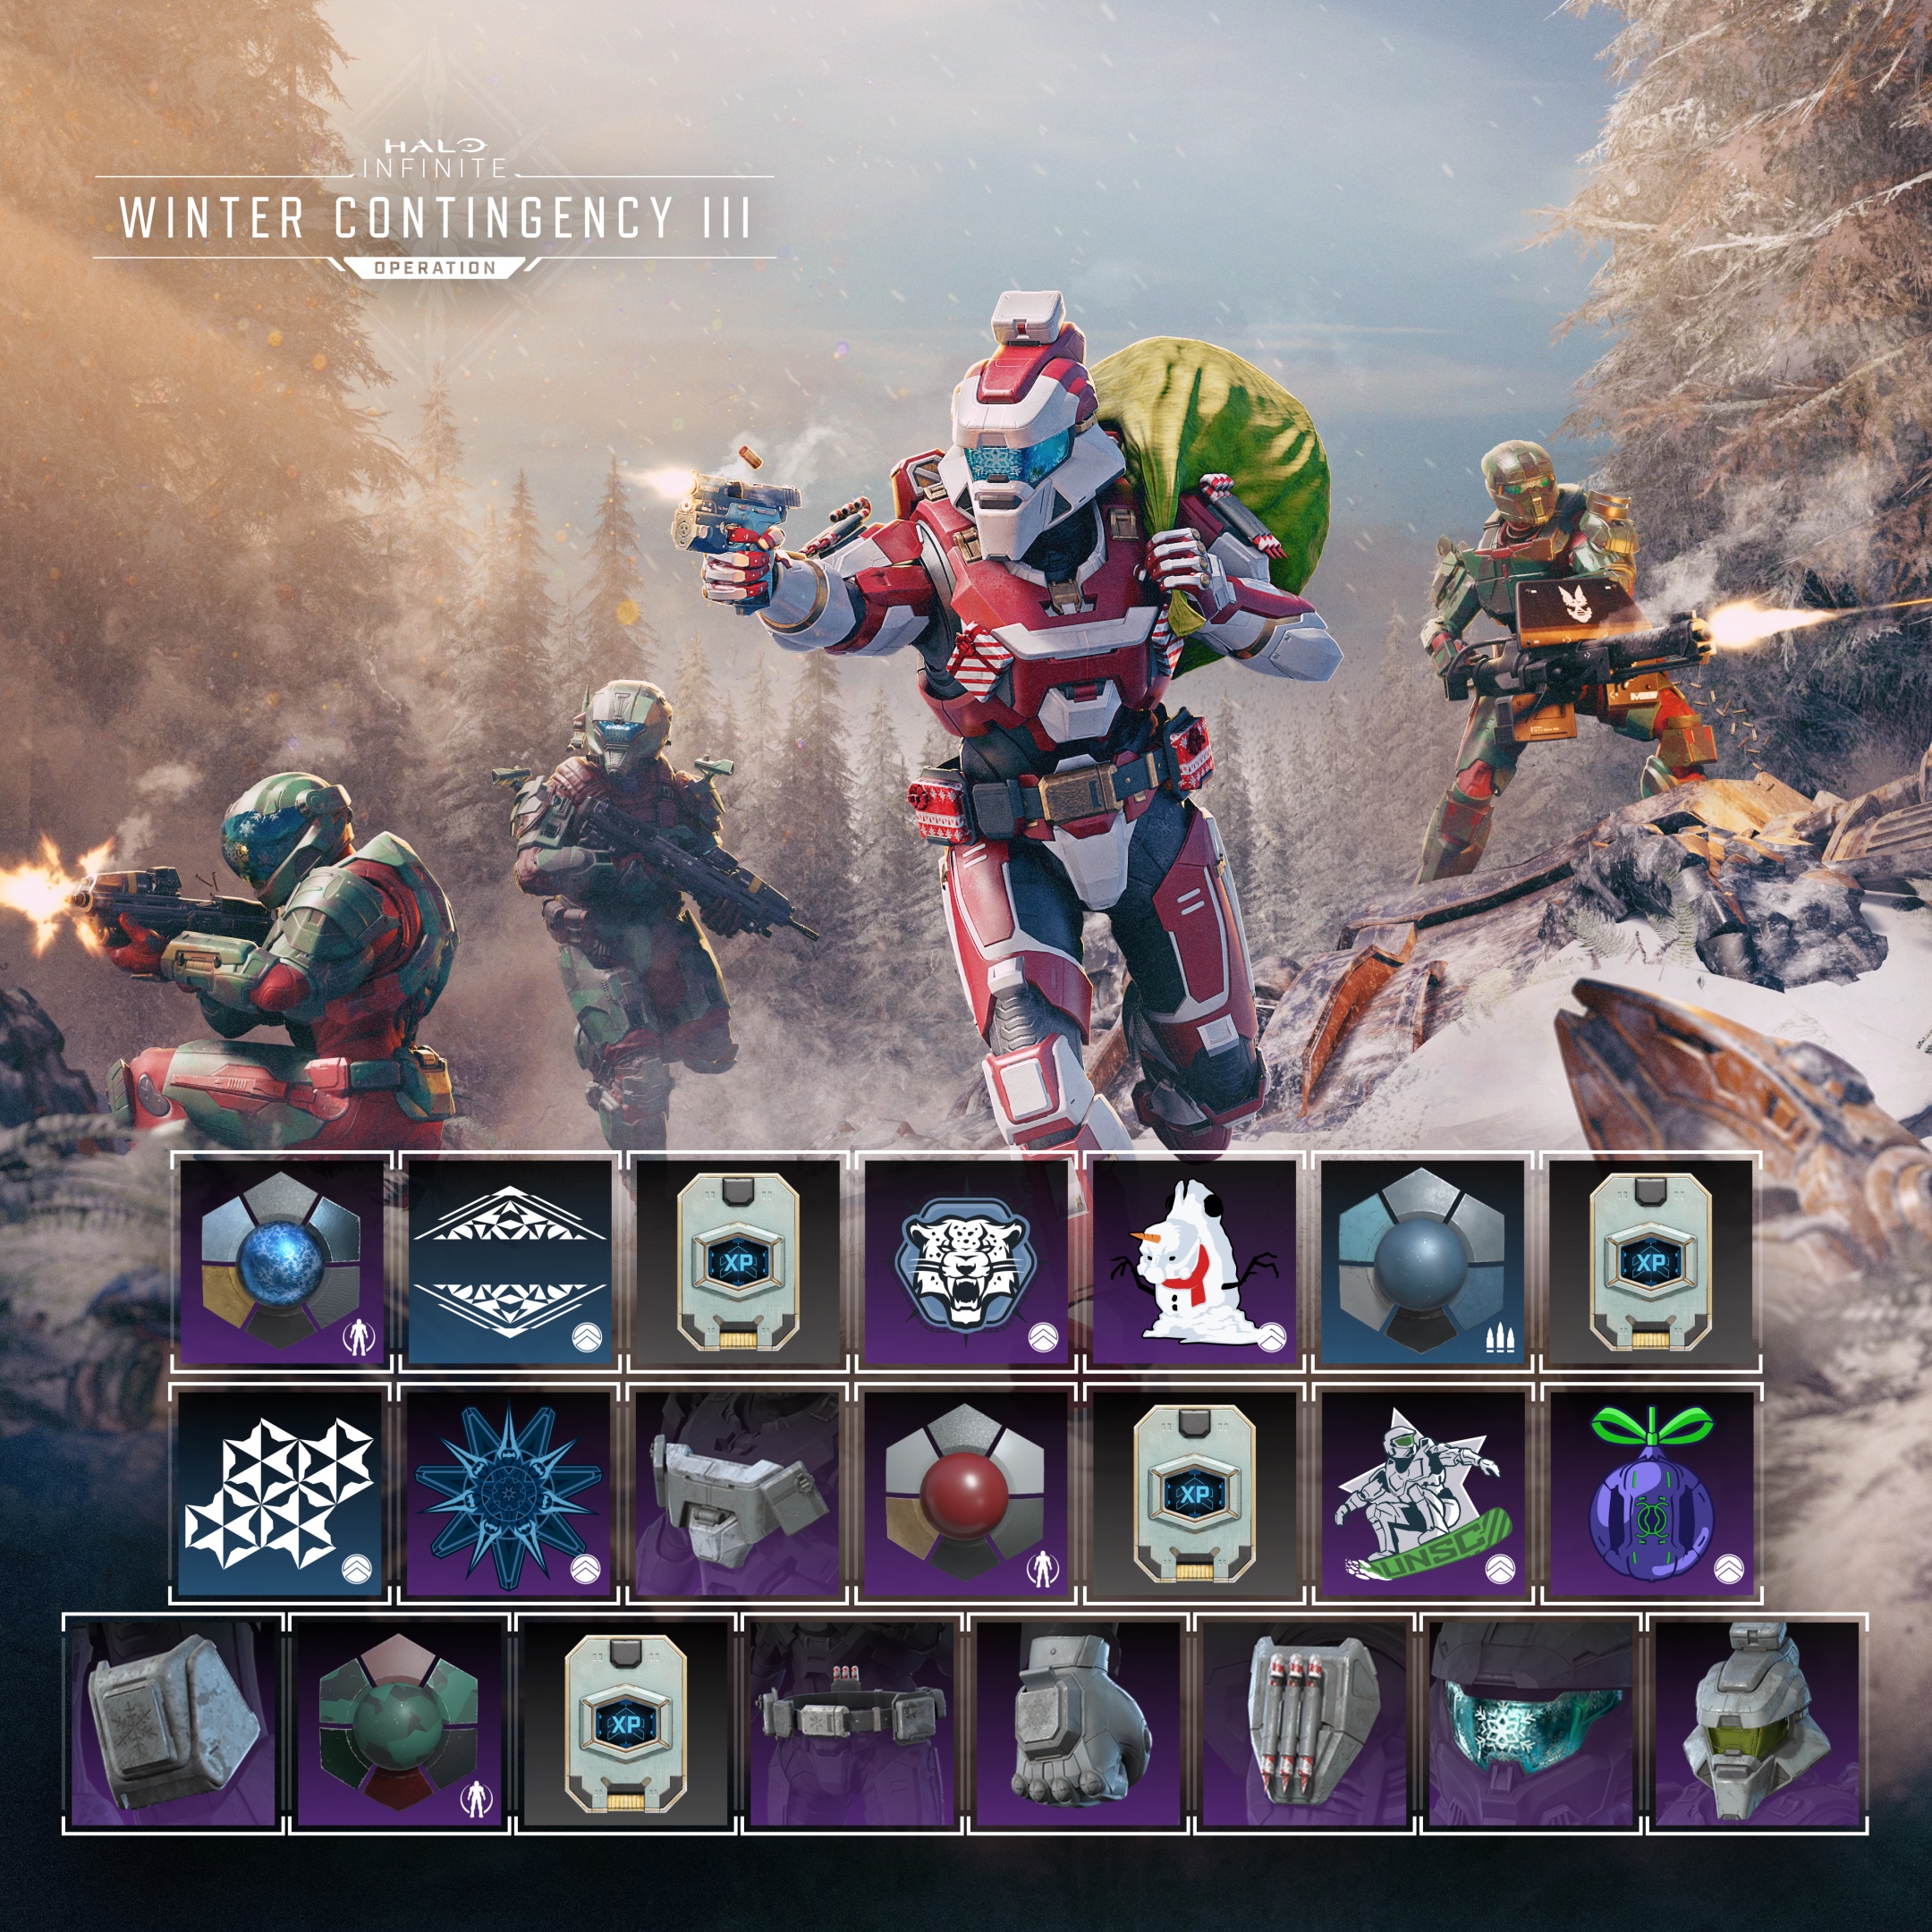 Image showing the Winter Contingency III key art along with the free reward track featuring 22 items